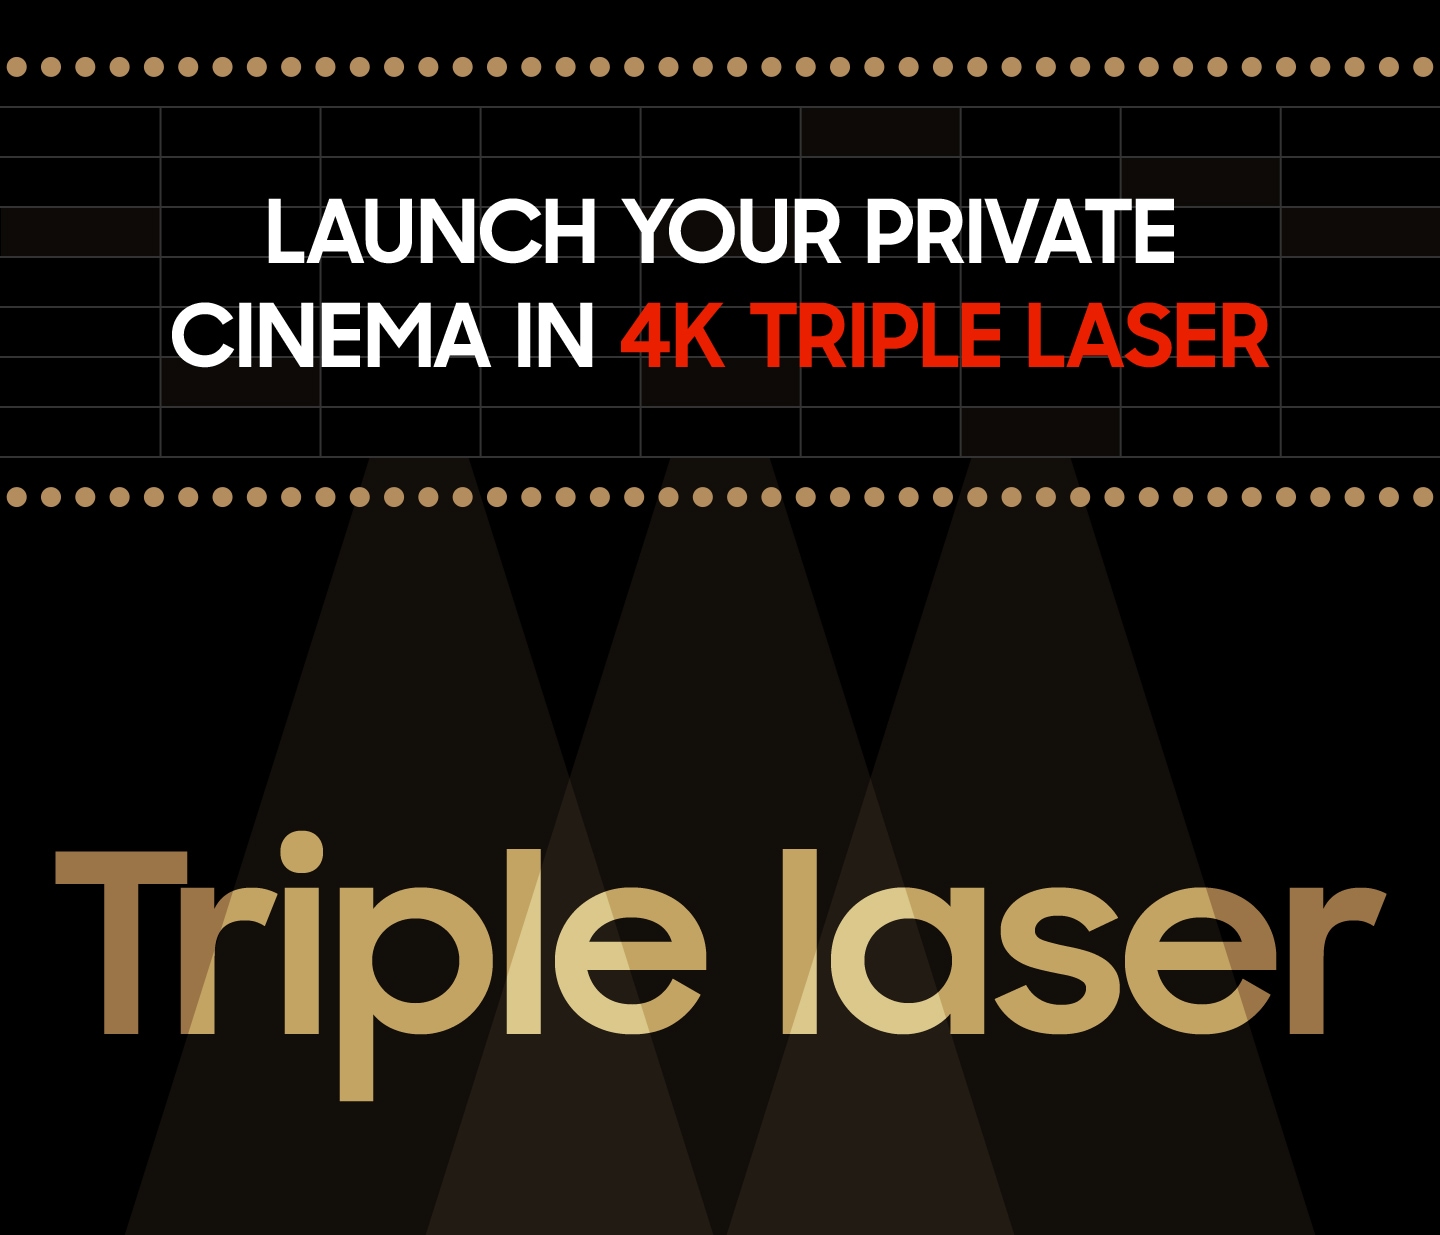 Launch your private cinema in 4K Triple laser
Triple laser